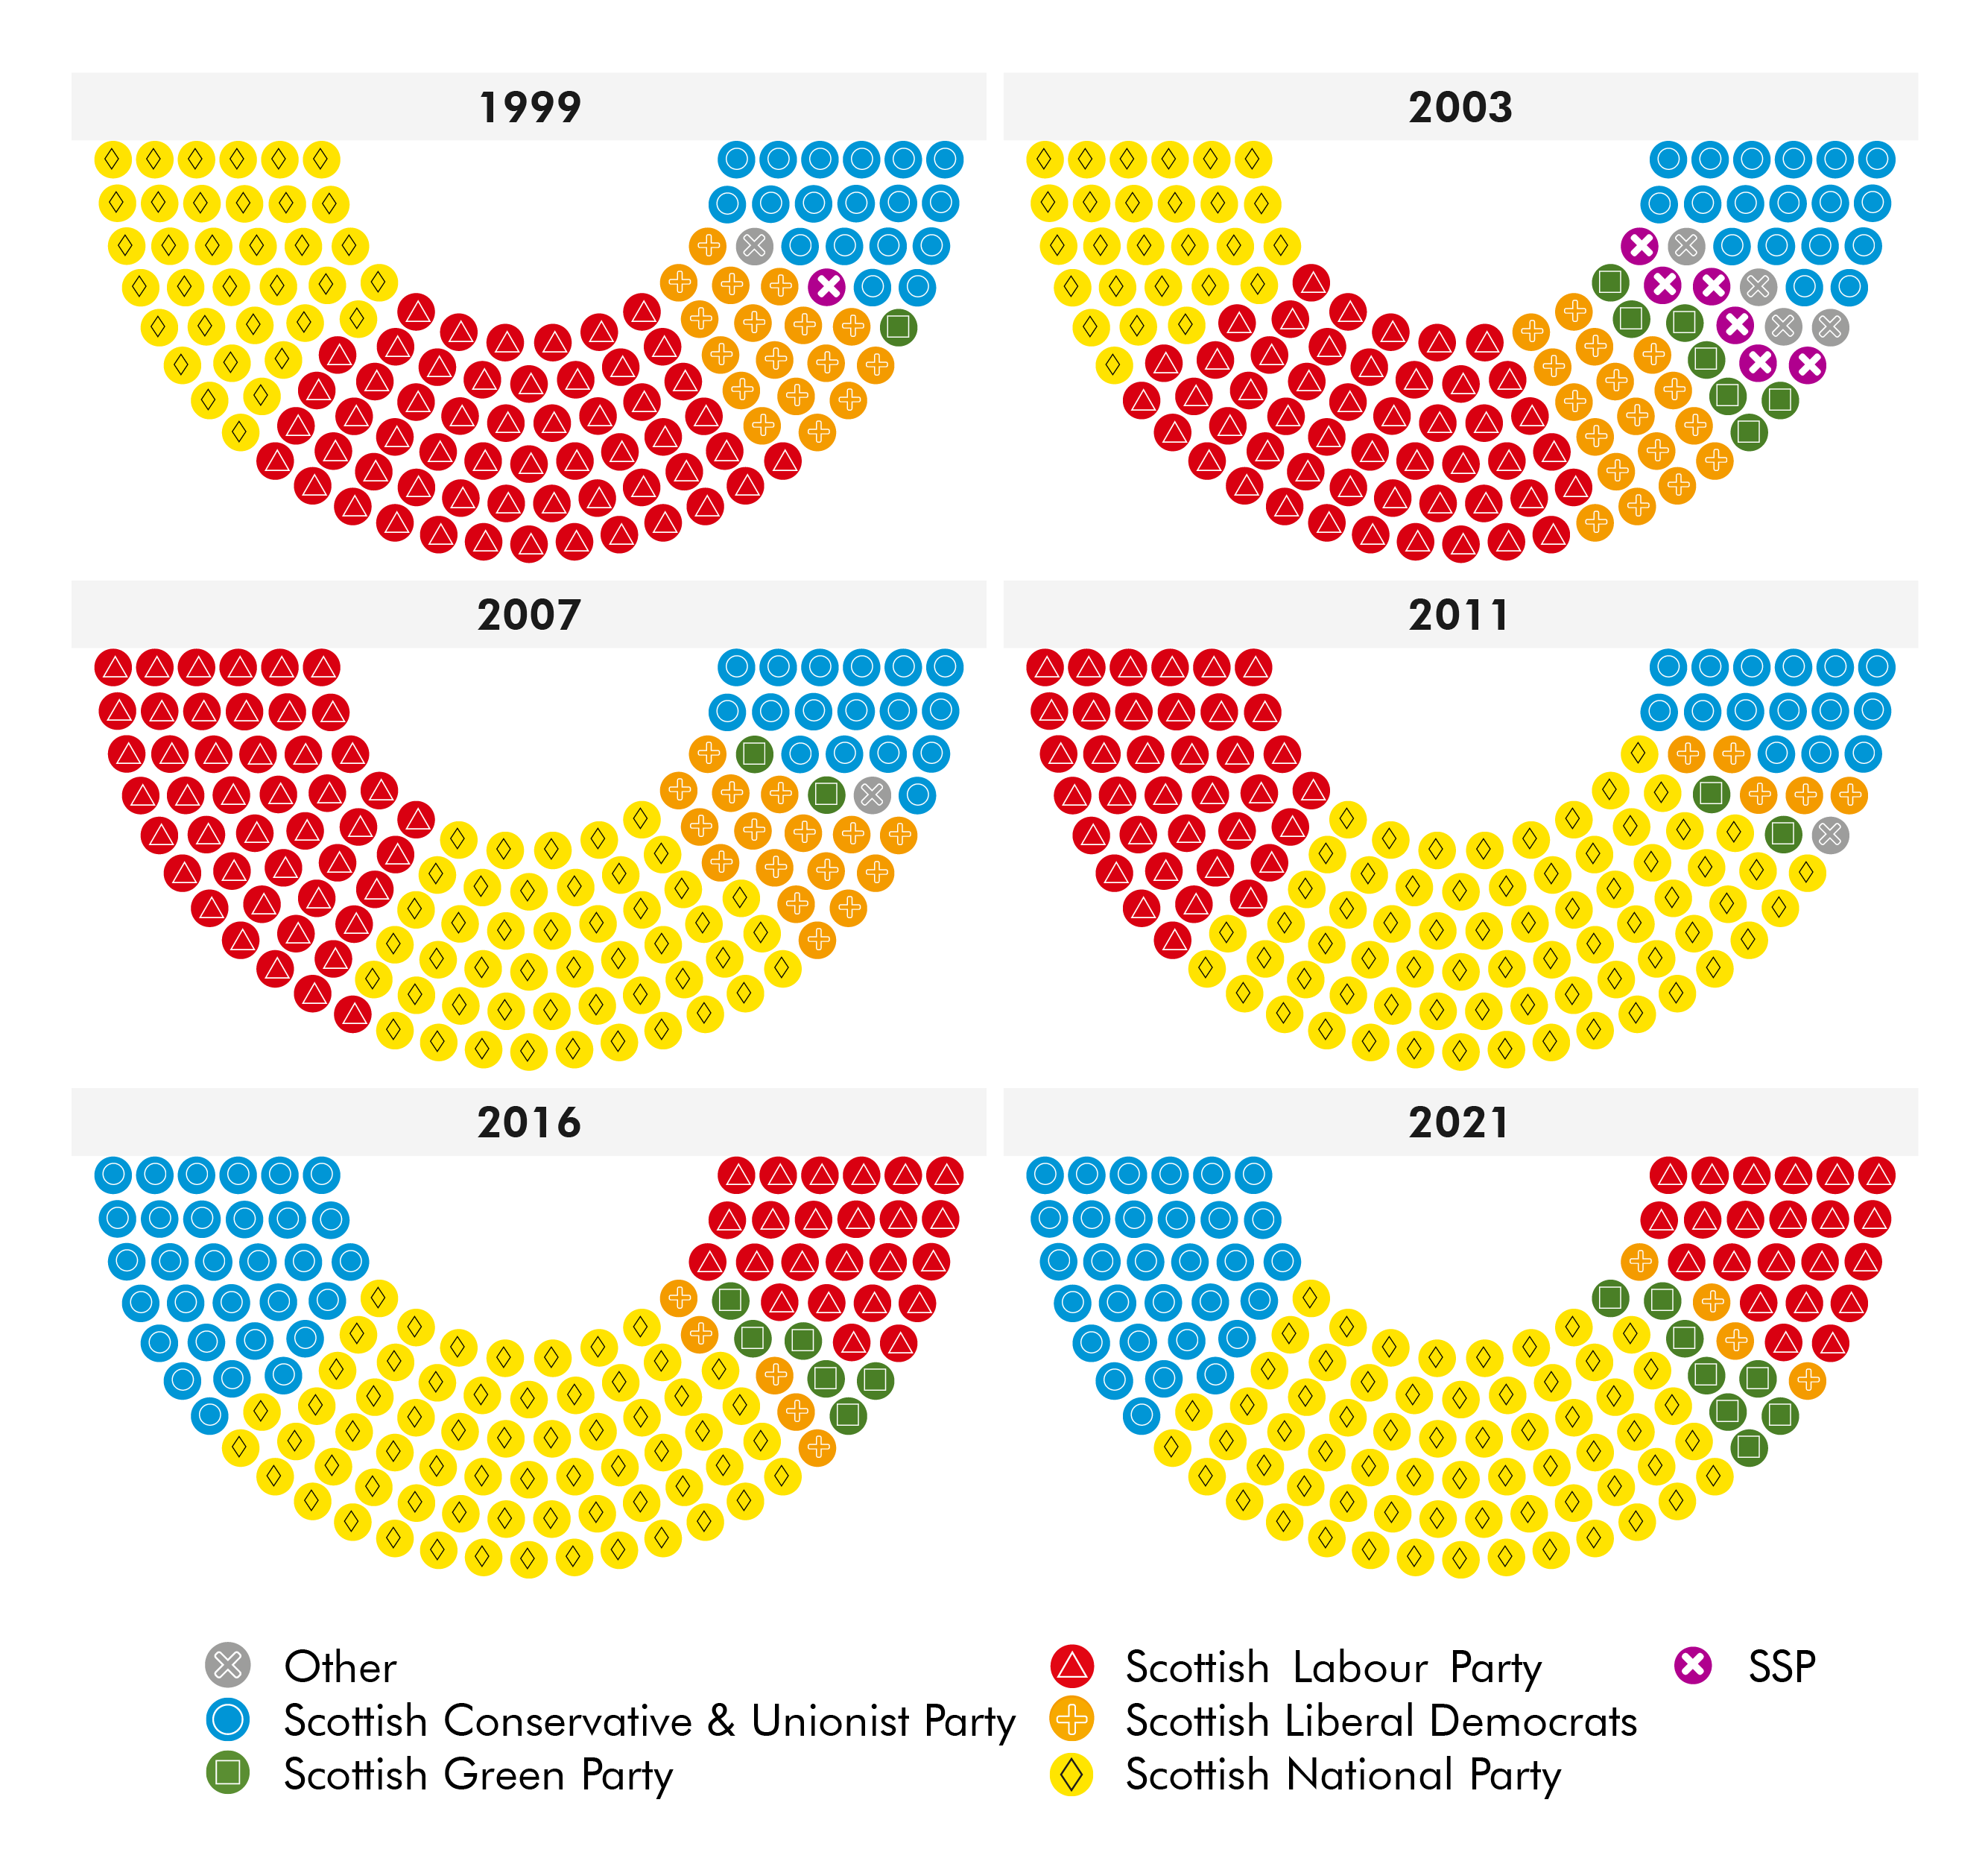 In 1999 and 2003 Labour won the most seats. Since then the SNP have had the most seats, wining a majority in 2011.